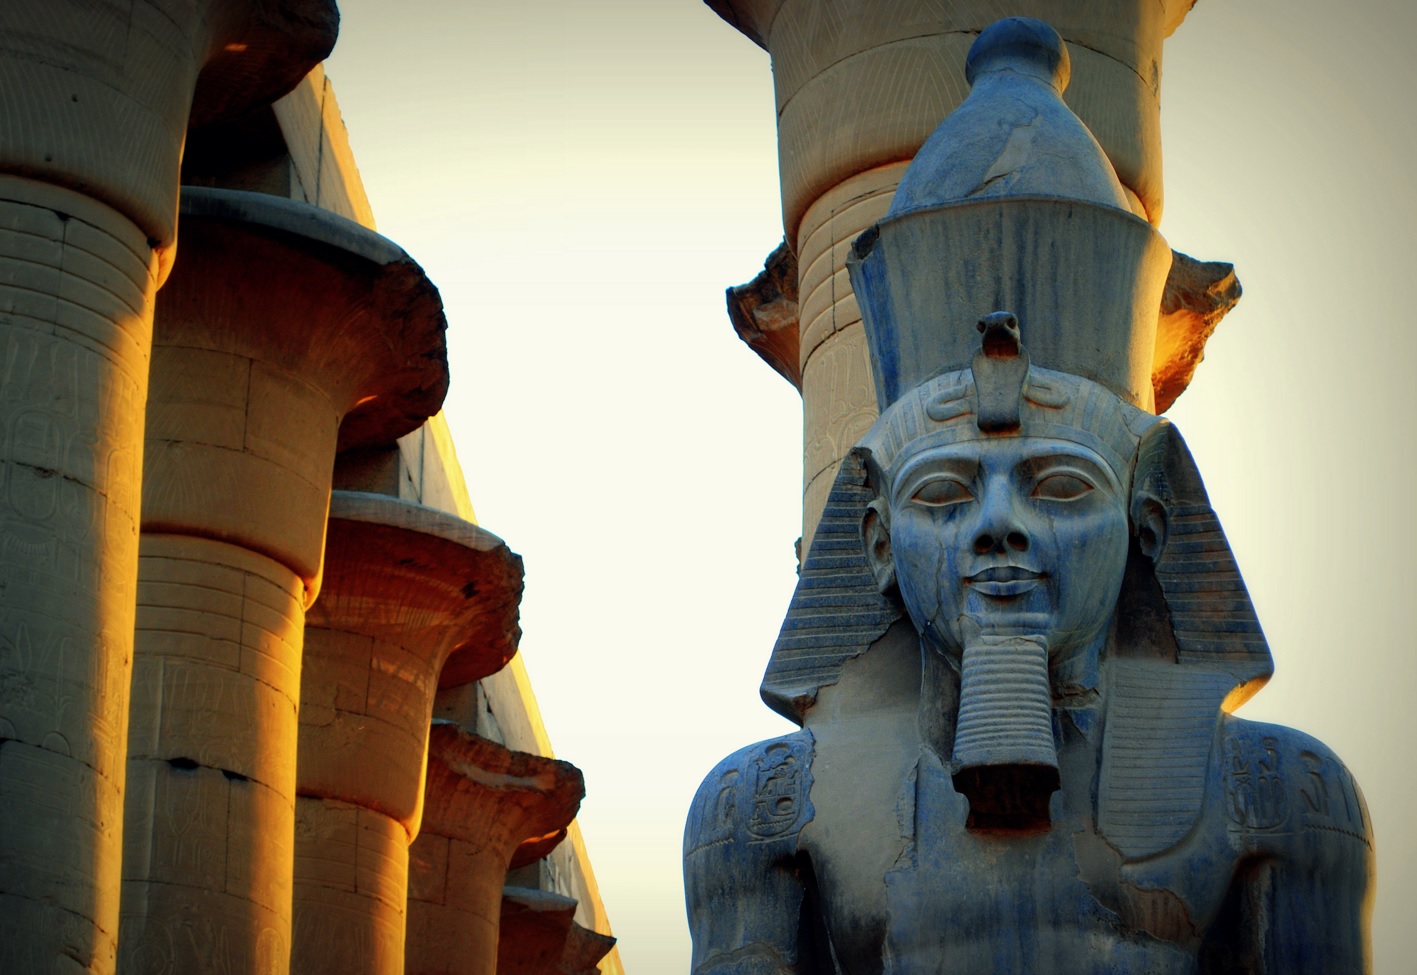 Statue of Ramses II in Luxor Temple (Credit: Mohammed Moussa, Wikicommons)